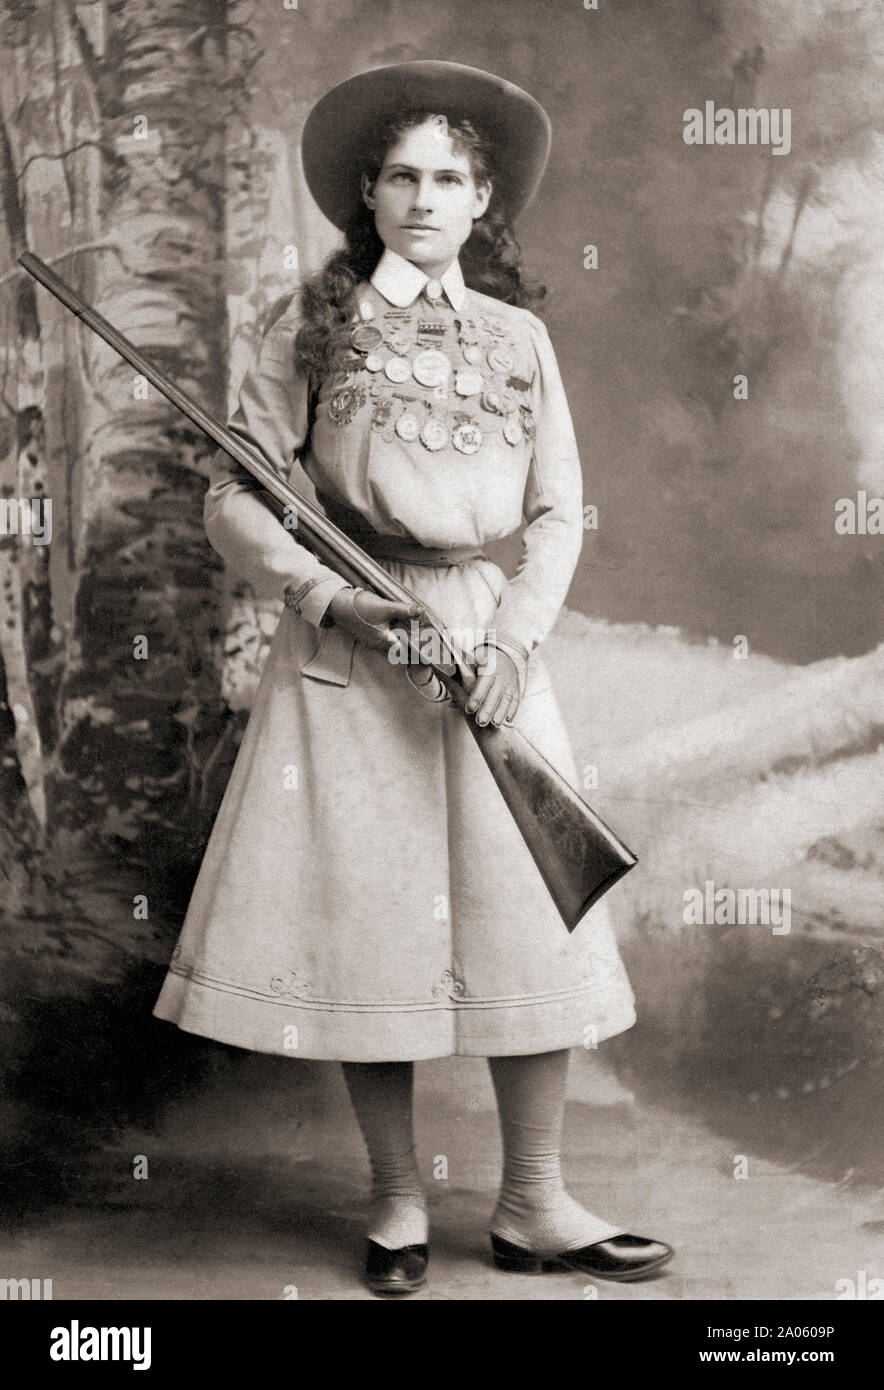 Annie Oakley, 1860 - 1926. American sharpshooter and exhibition shooter  Stock Photo - Alamy